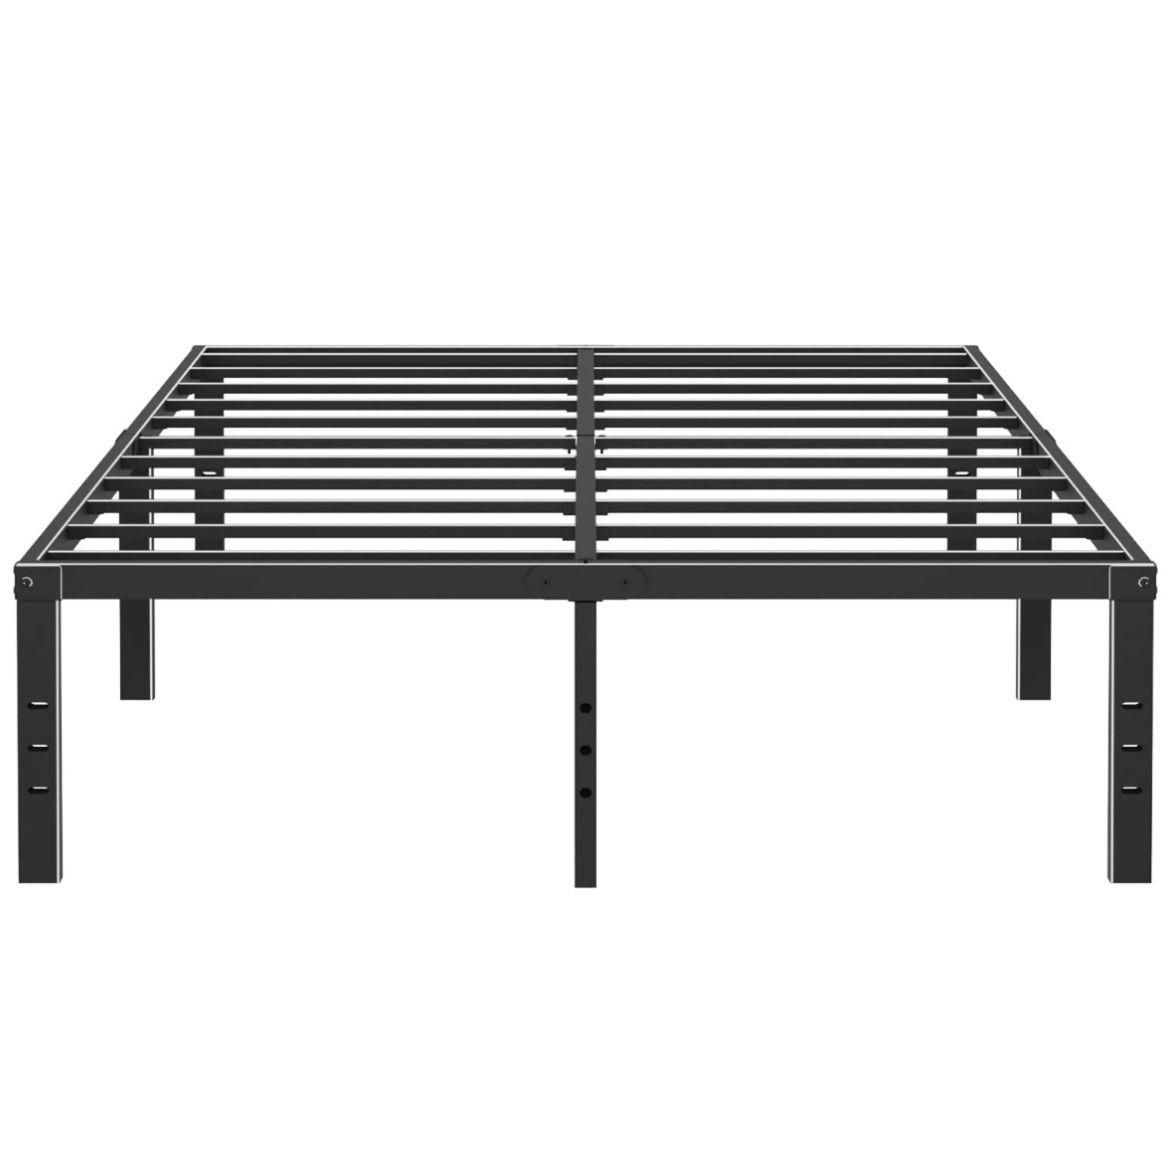 18” CALIFORNIA KING SIZE BED FRAME